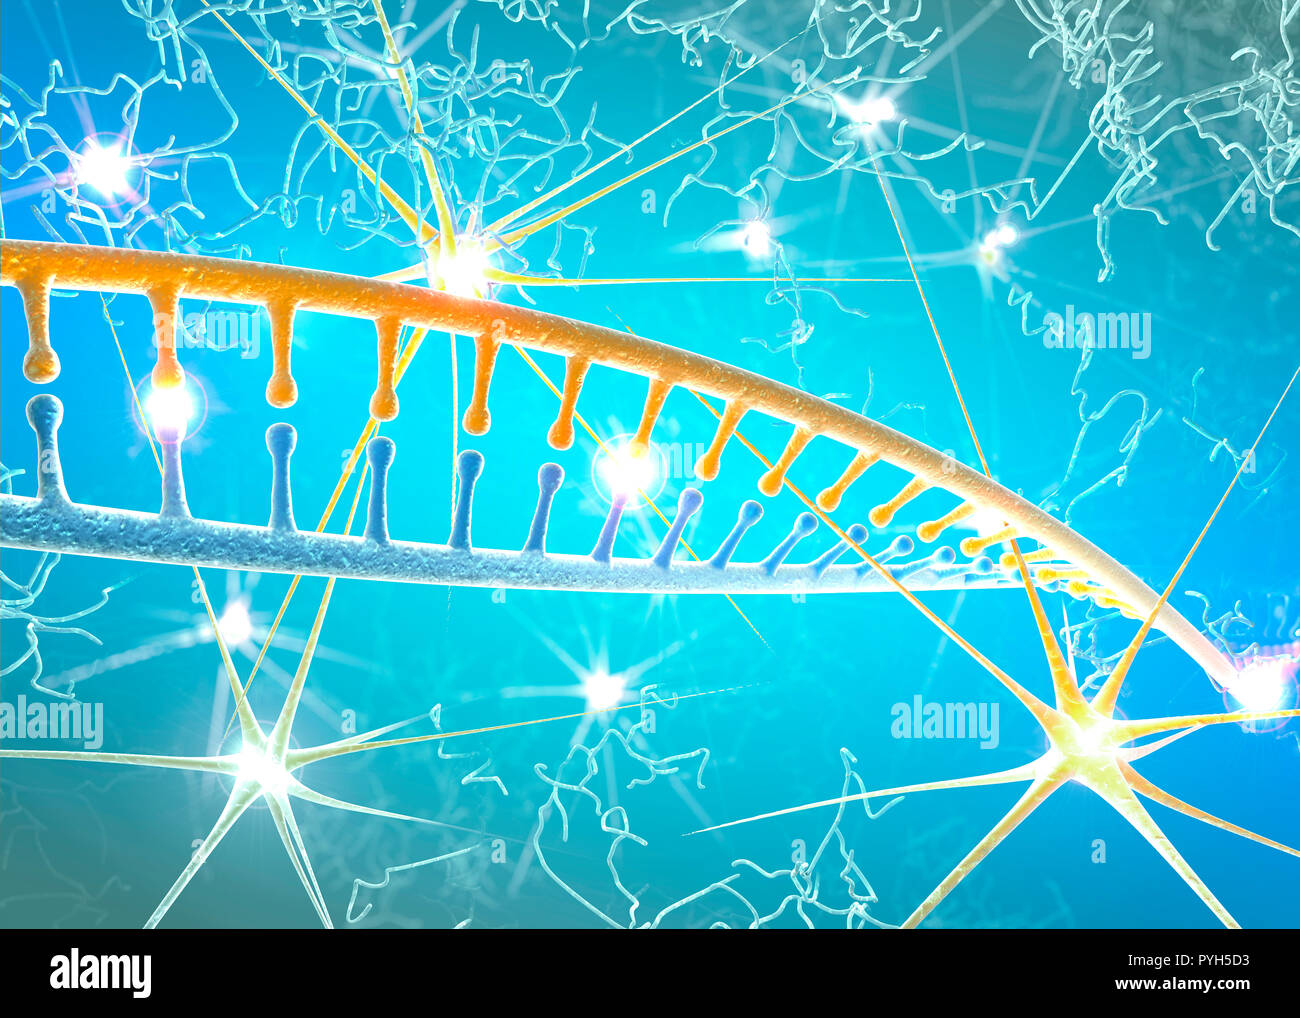 DNA and neurons, DNA restructuring, rewriting and continuous regeneration, increased activity of nerve cells, chromosomes and genetic material Stock Photo